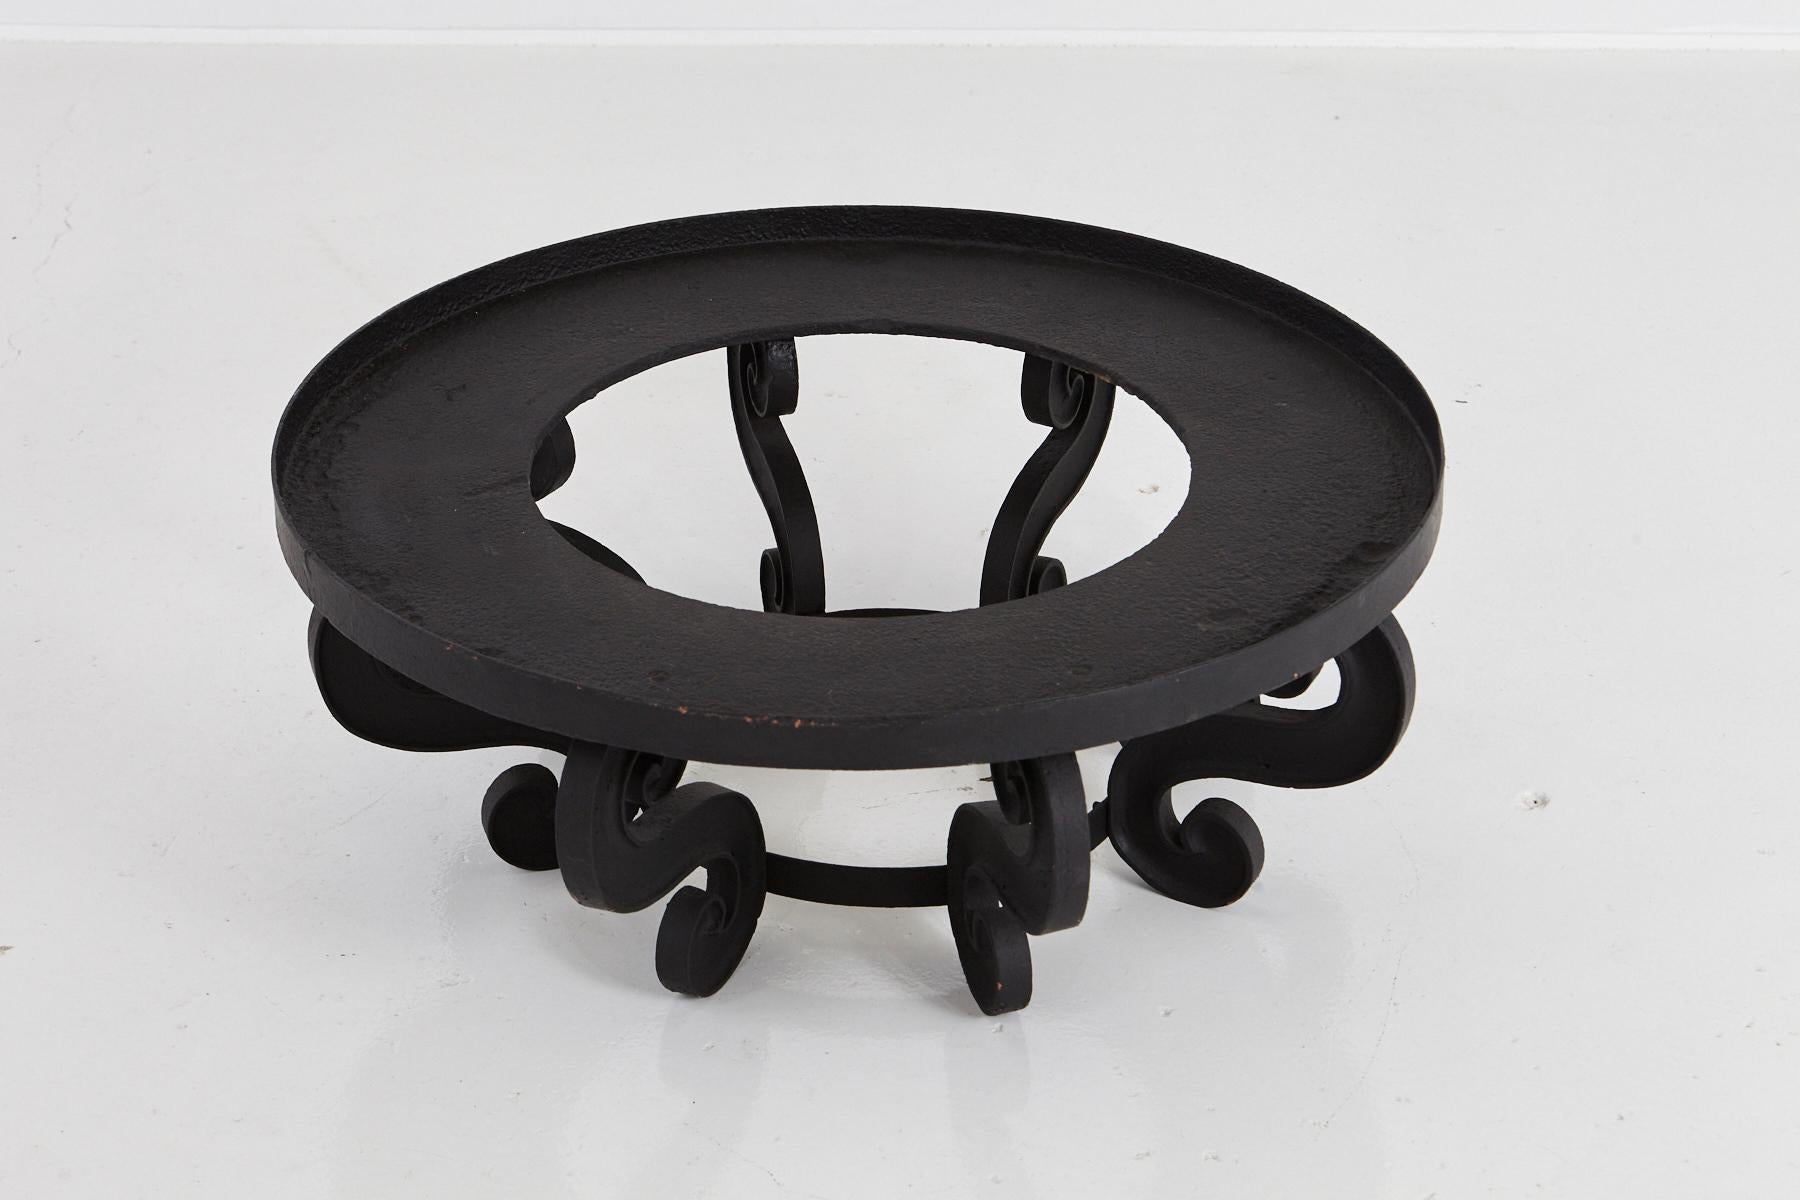 American Industrial Style Large and Low Round Mat Black Iron Garden Table, circa 1920s